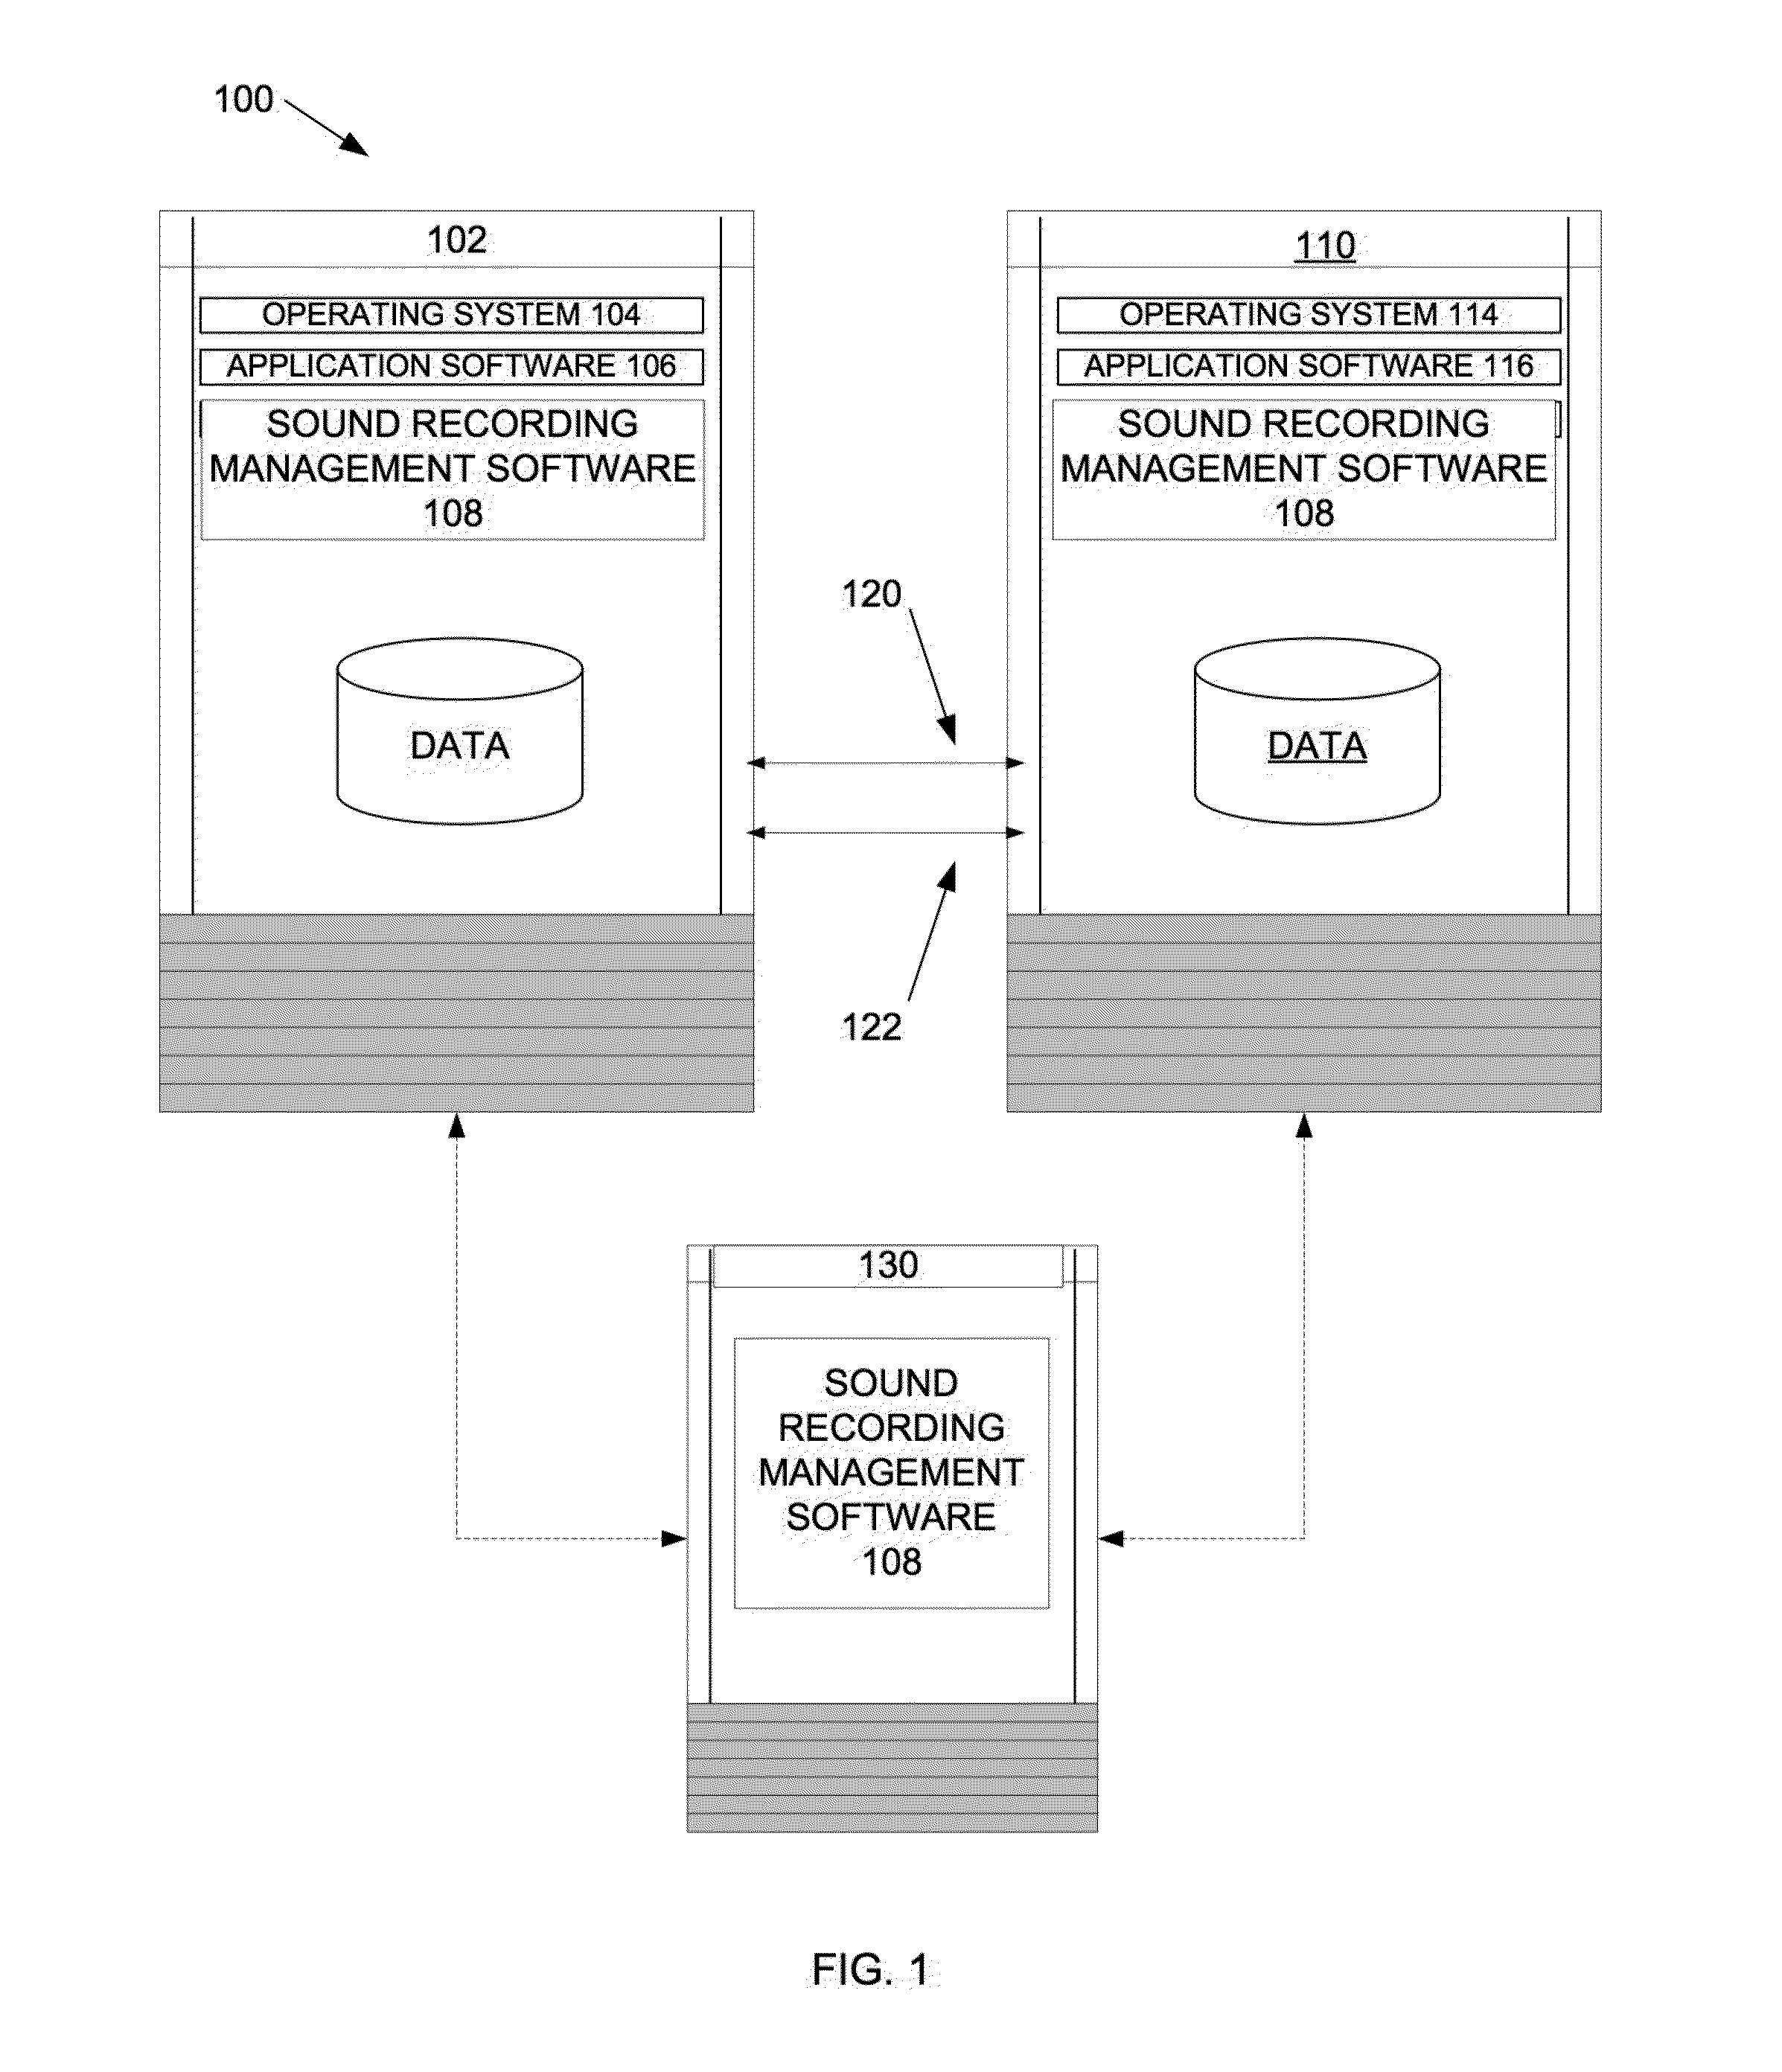 Method and apparatus for remote voice-over or music production and management